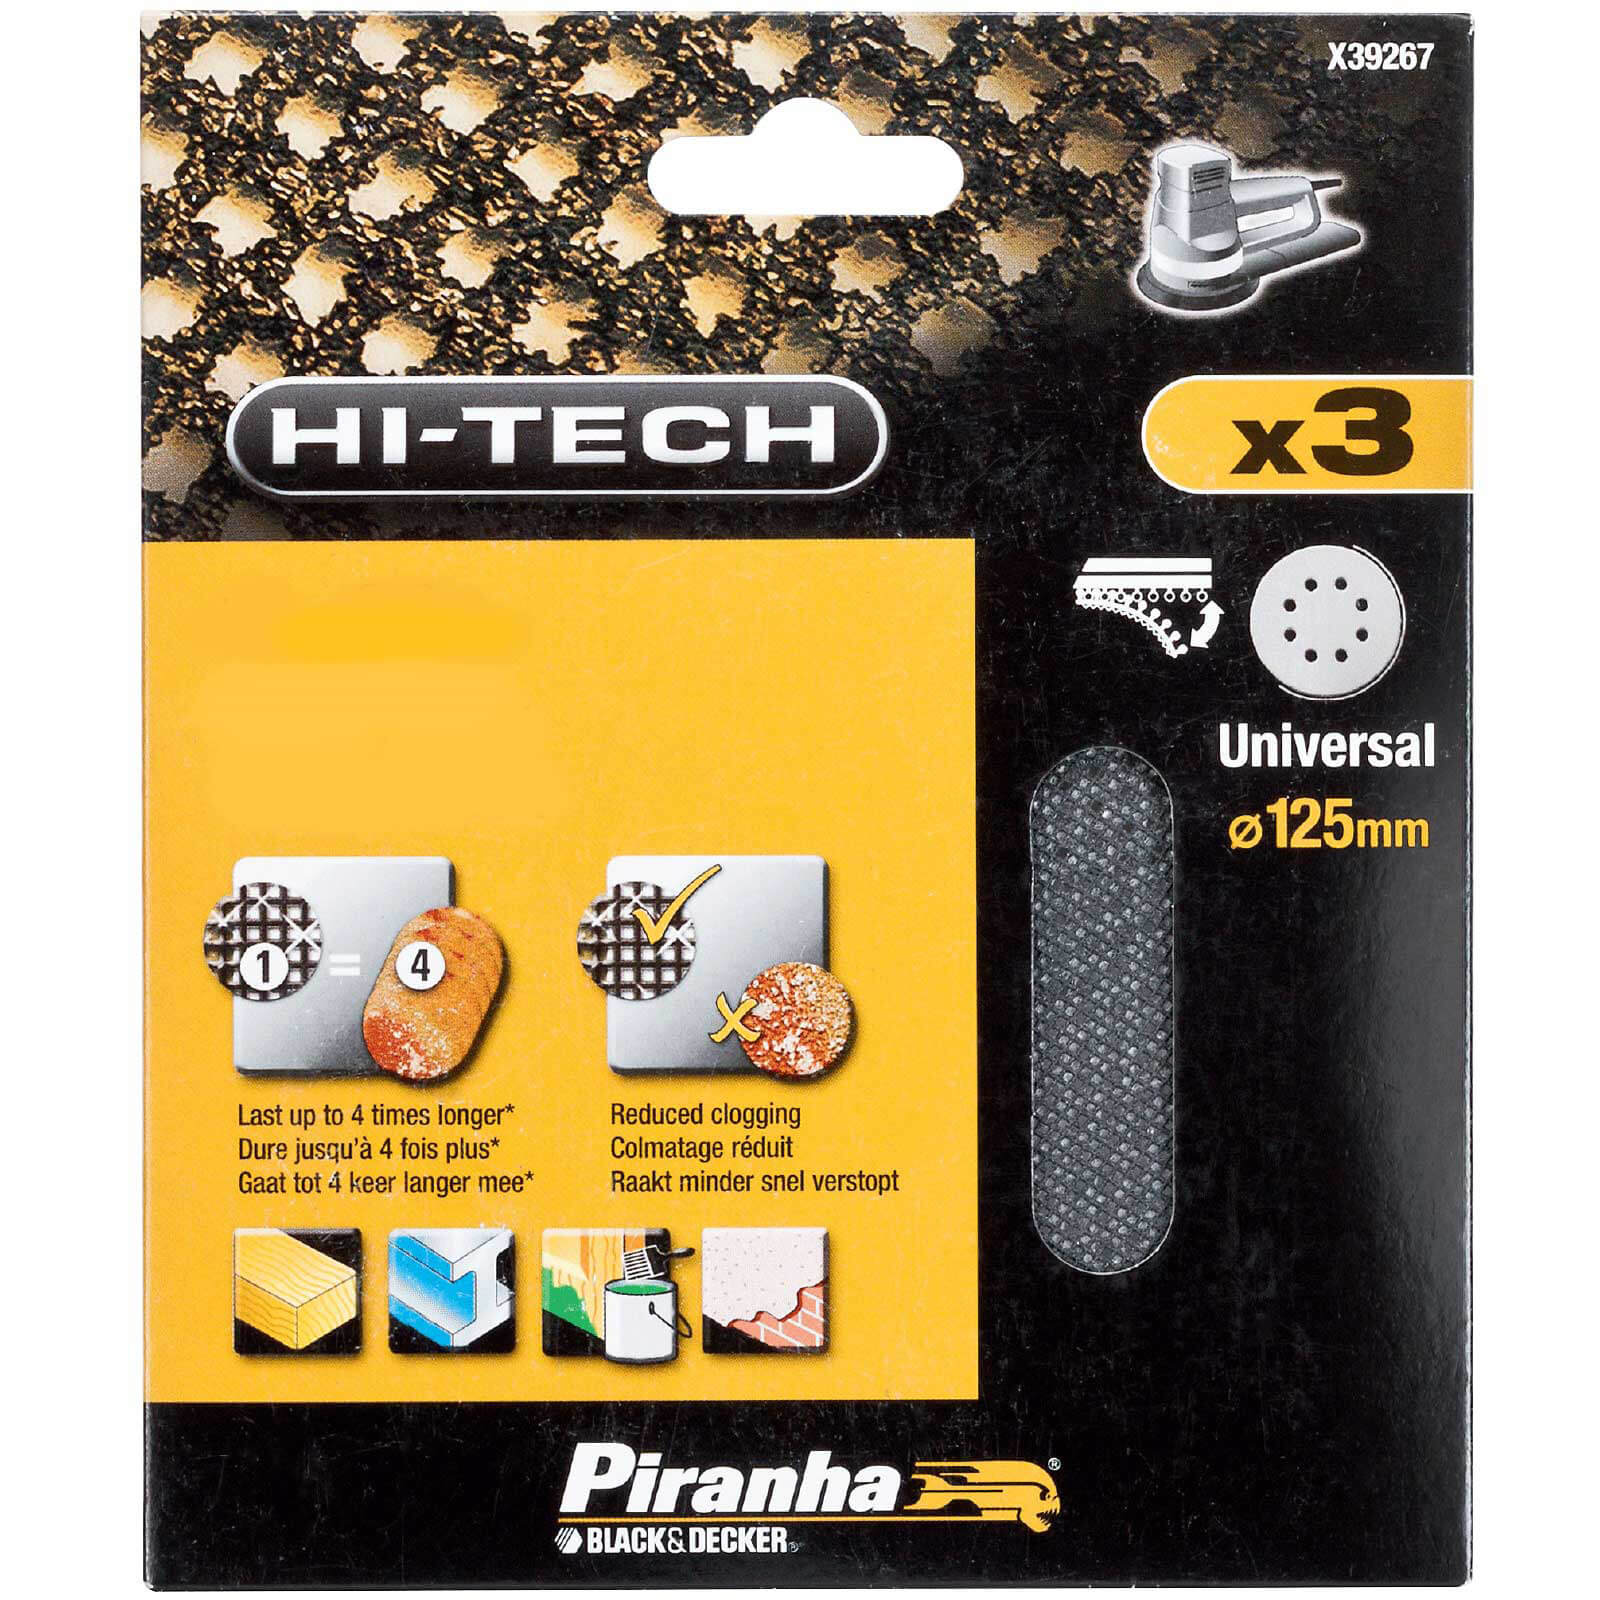 Image of Black and Decker Piranha Hi Tech Quick Fit Mesh ROS Sanding Sheets 125mm 125mm 240g Pack of 3